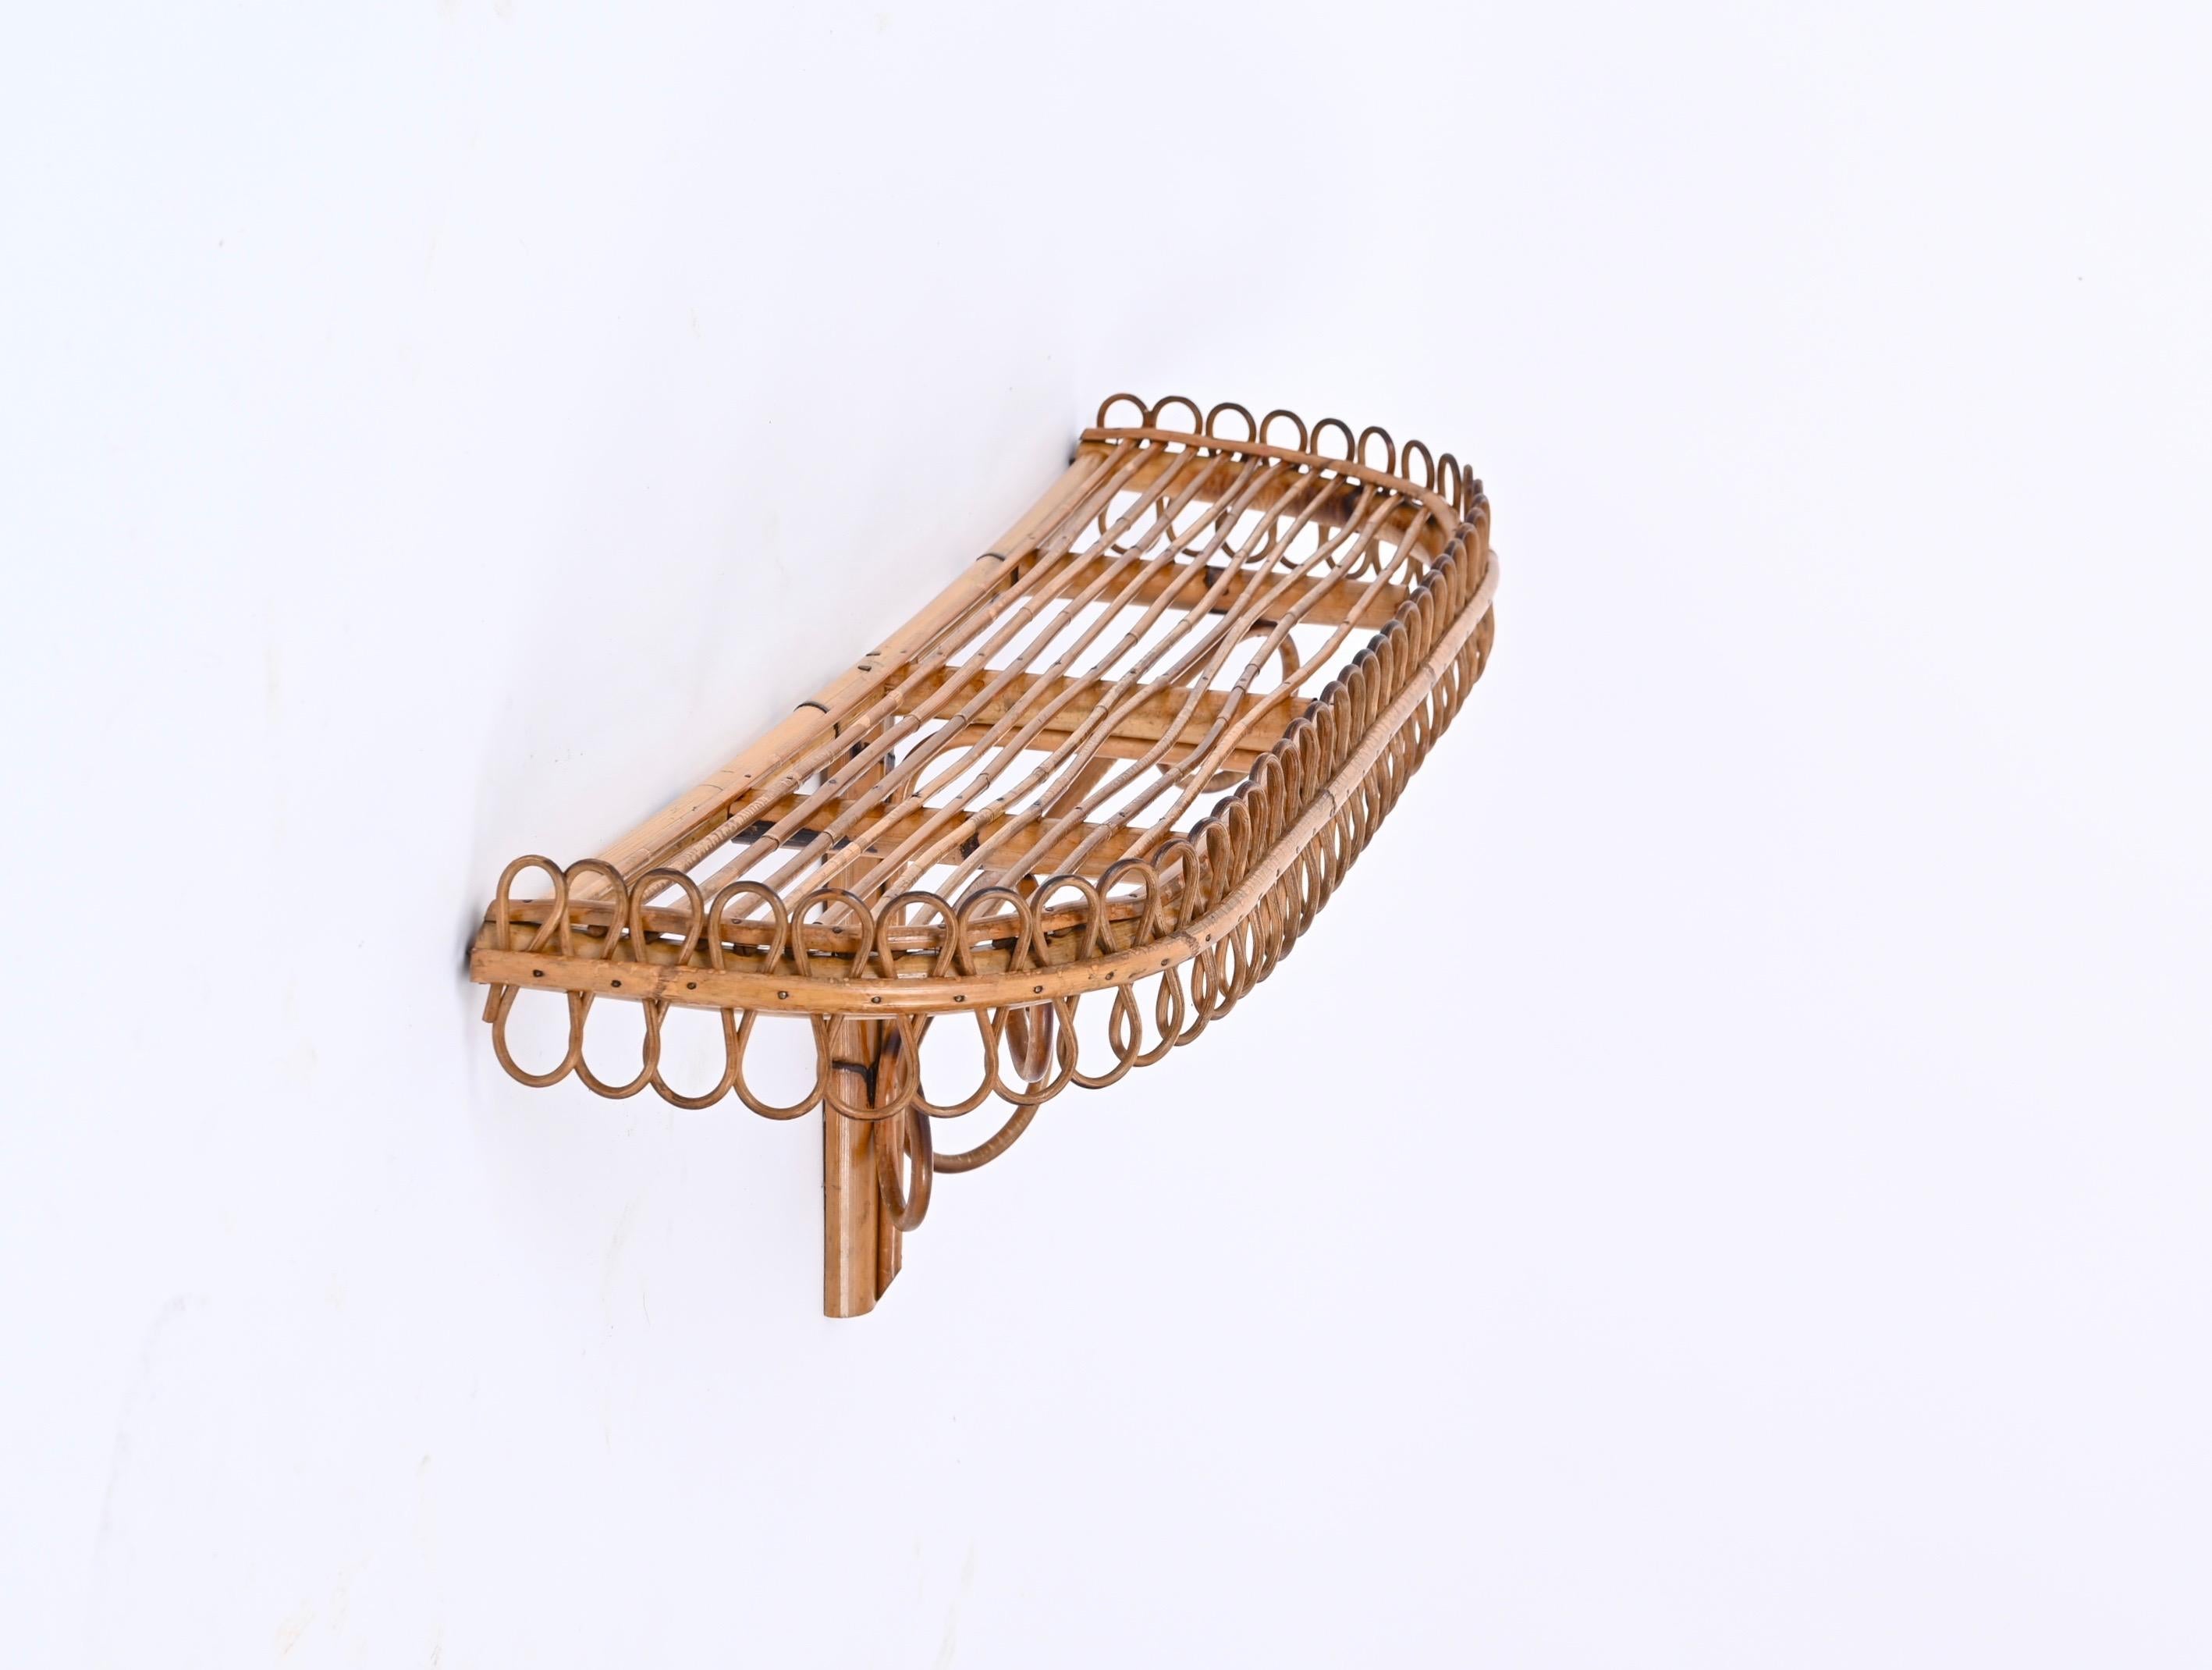 Midcentury Wall Shelf or Console, Rattan and Bamboo, Franco Albini, Italy, 1960s For Sale 7